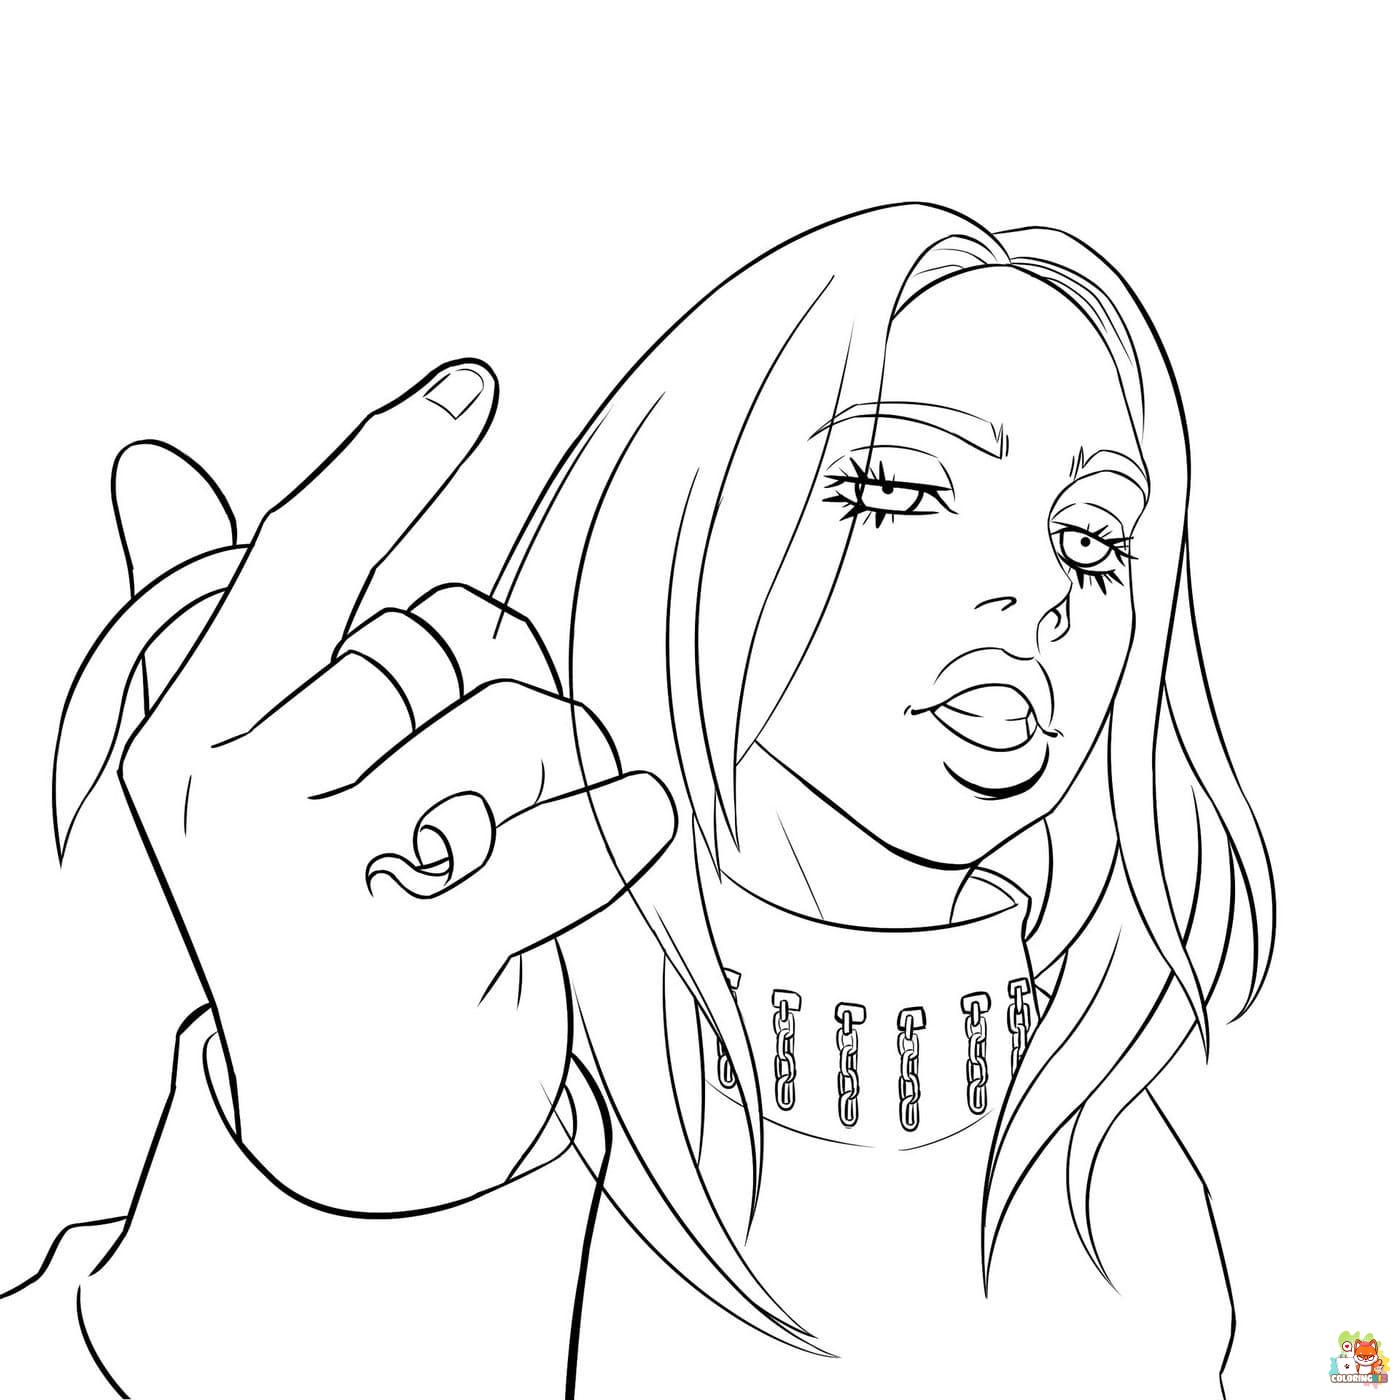 Free billie eilish coloring pages for kids